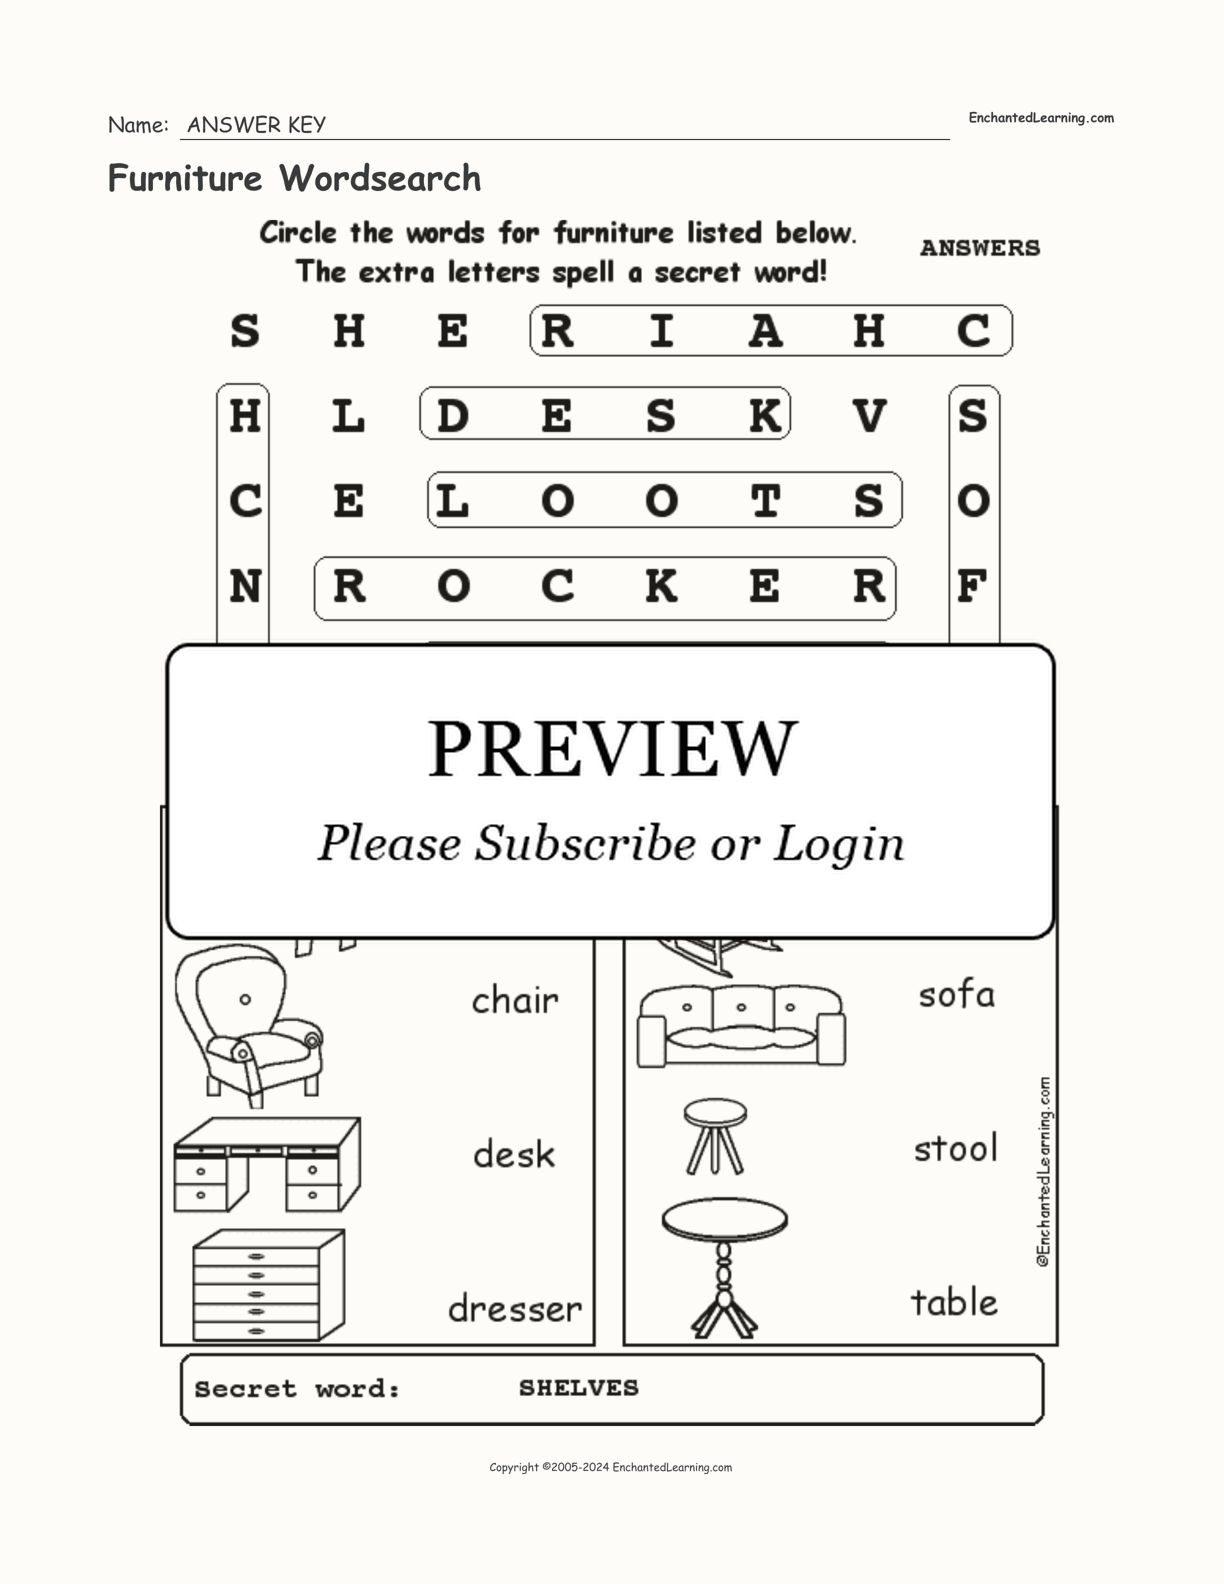 Furniture Wordsearch interactive worksheet page 2